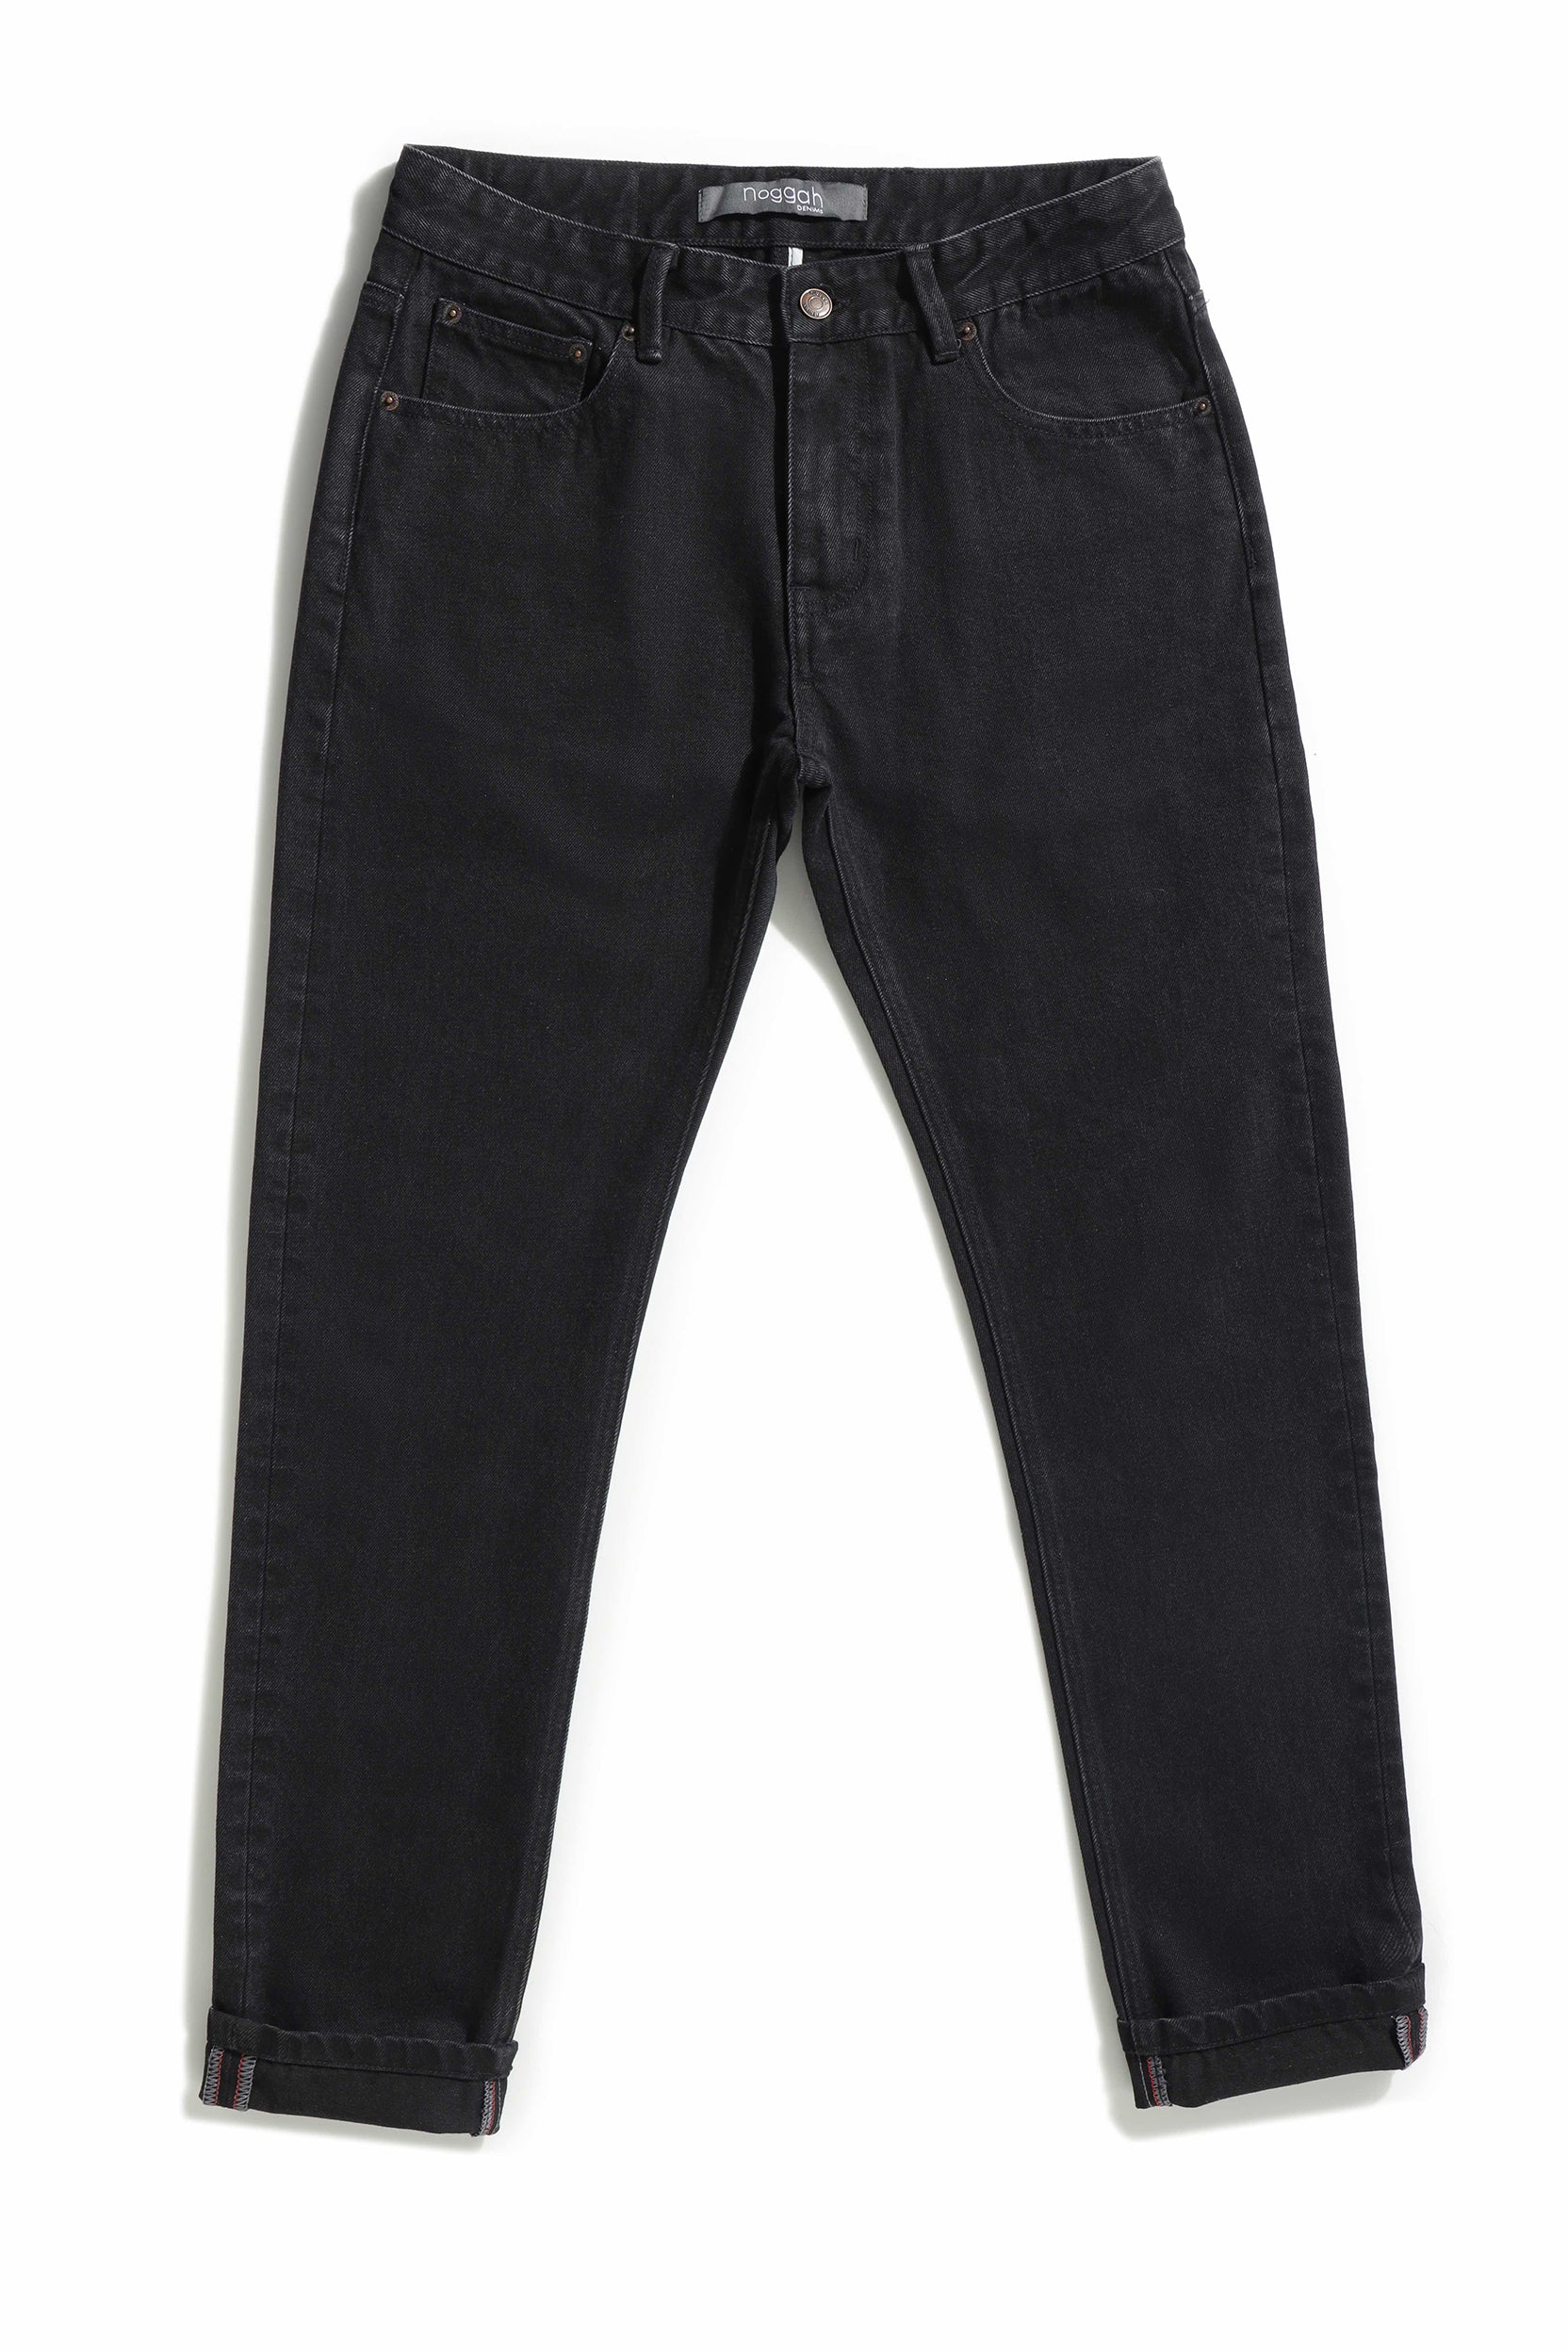 Men Jeans - Buy Men Jeans Online at Best Price in India | Suvidha Stores